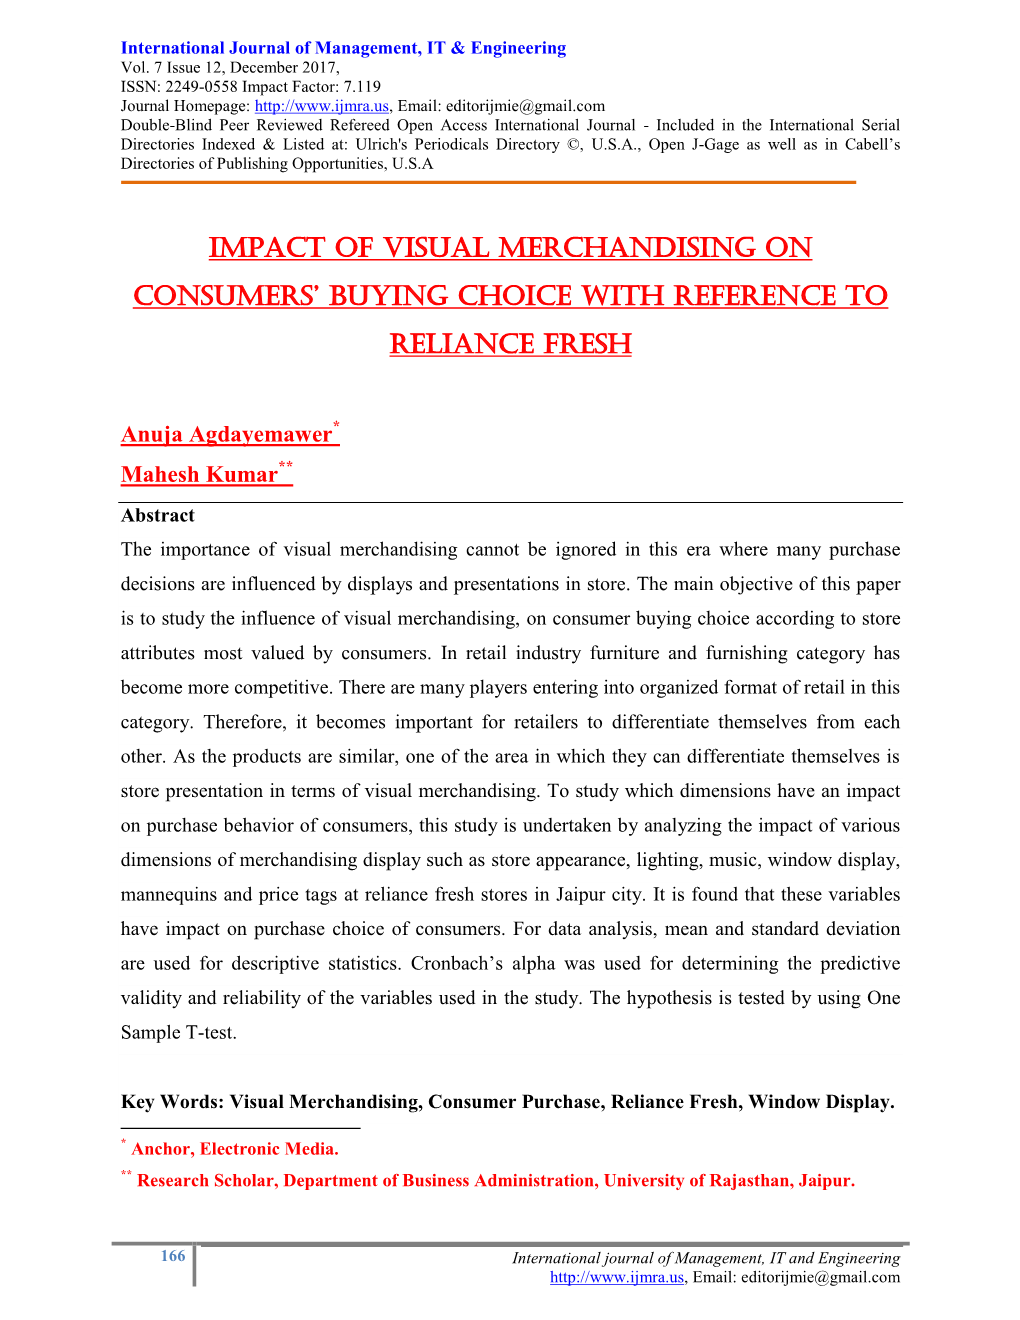 Impact of Visual Merchandising on Consumers’ Buying Choice with Reference to Reliance Fresh